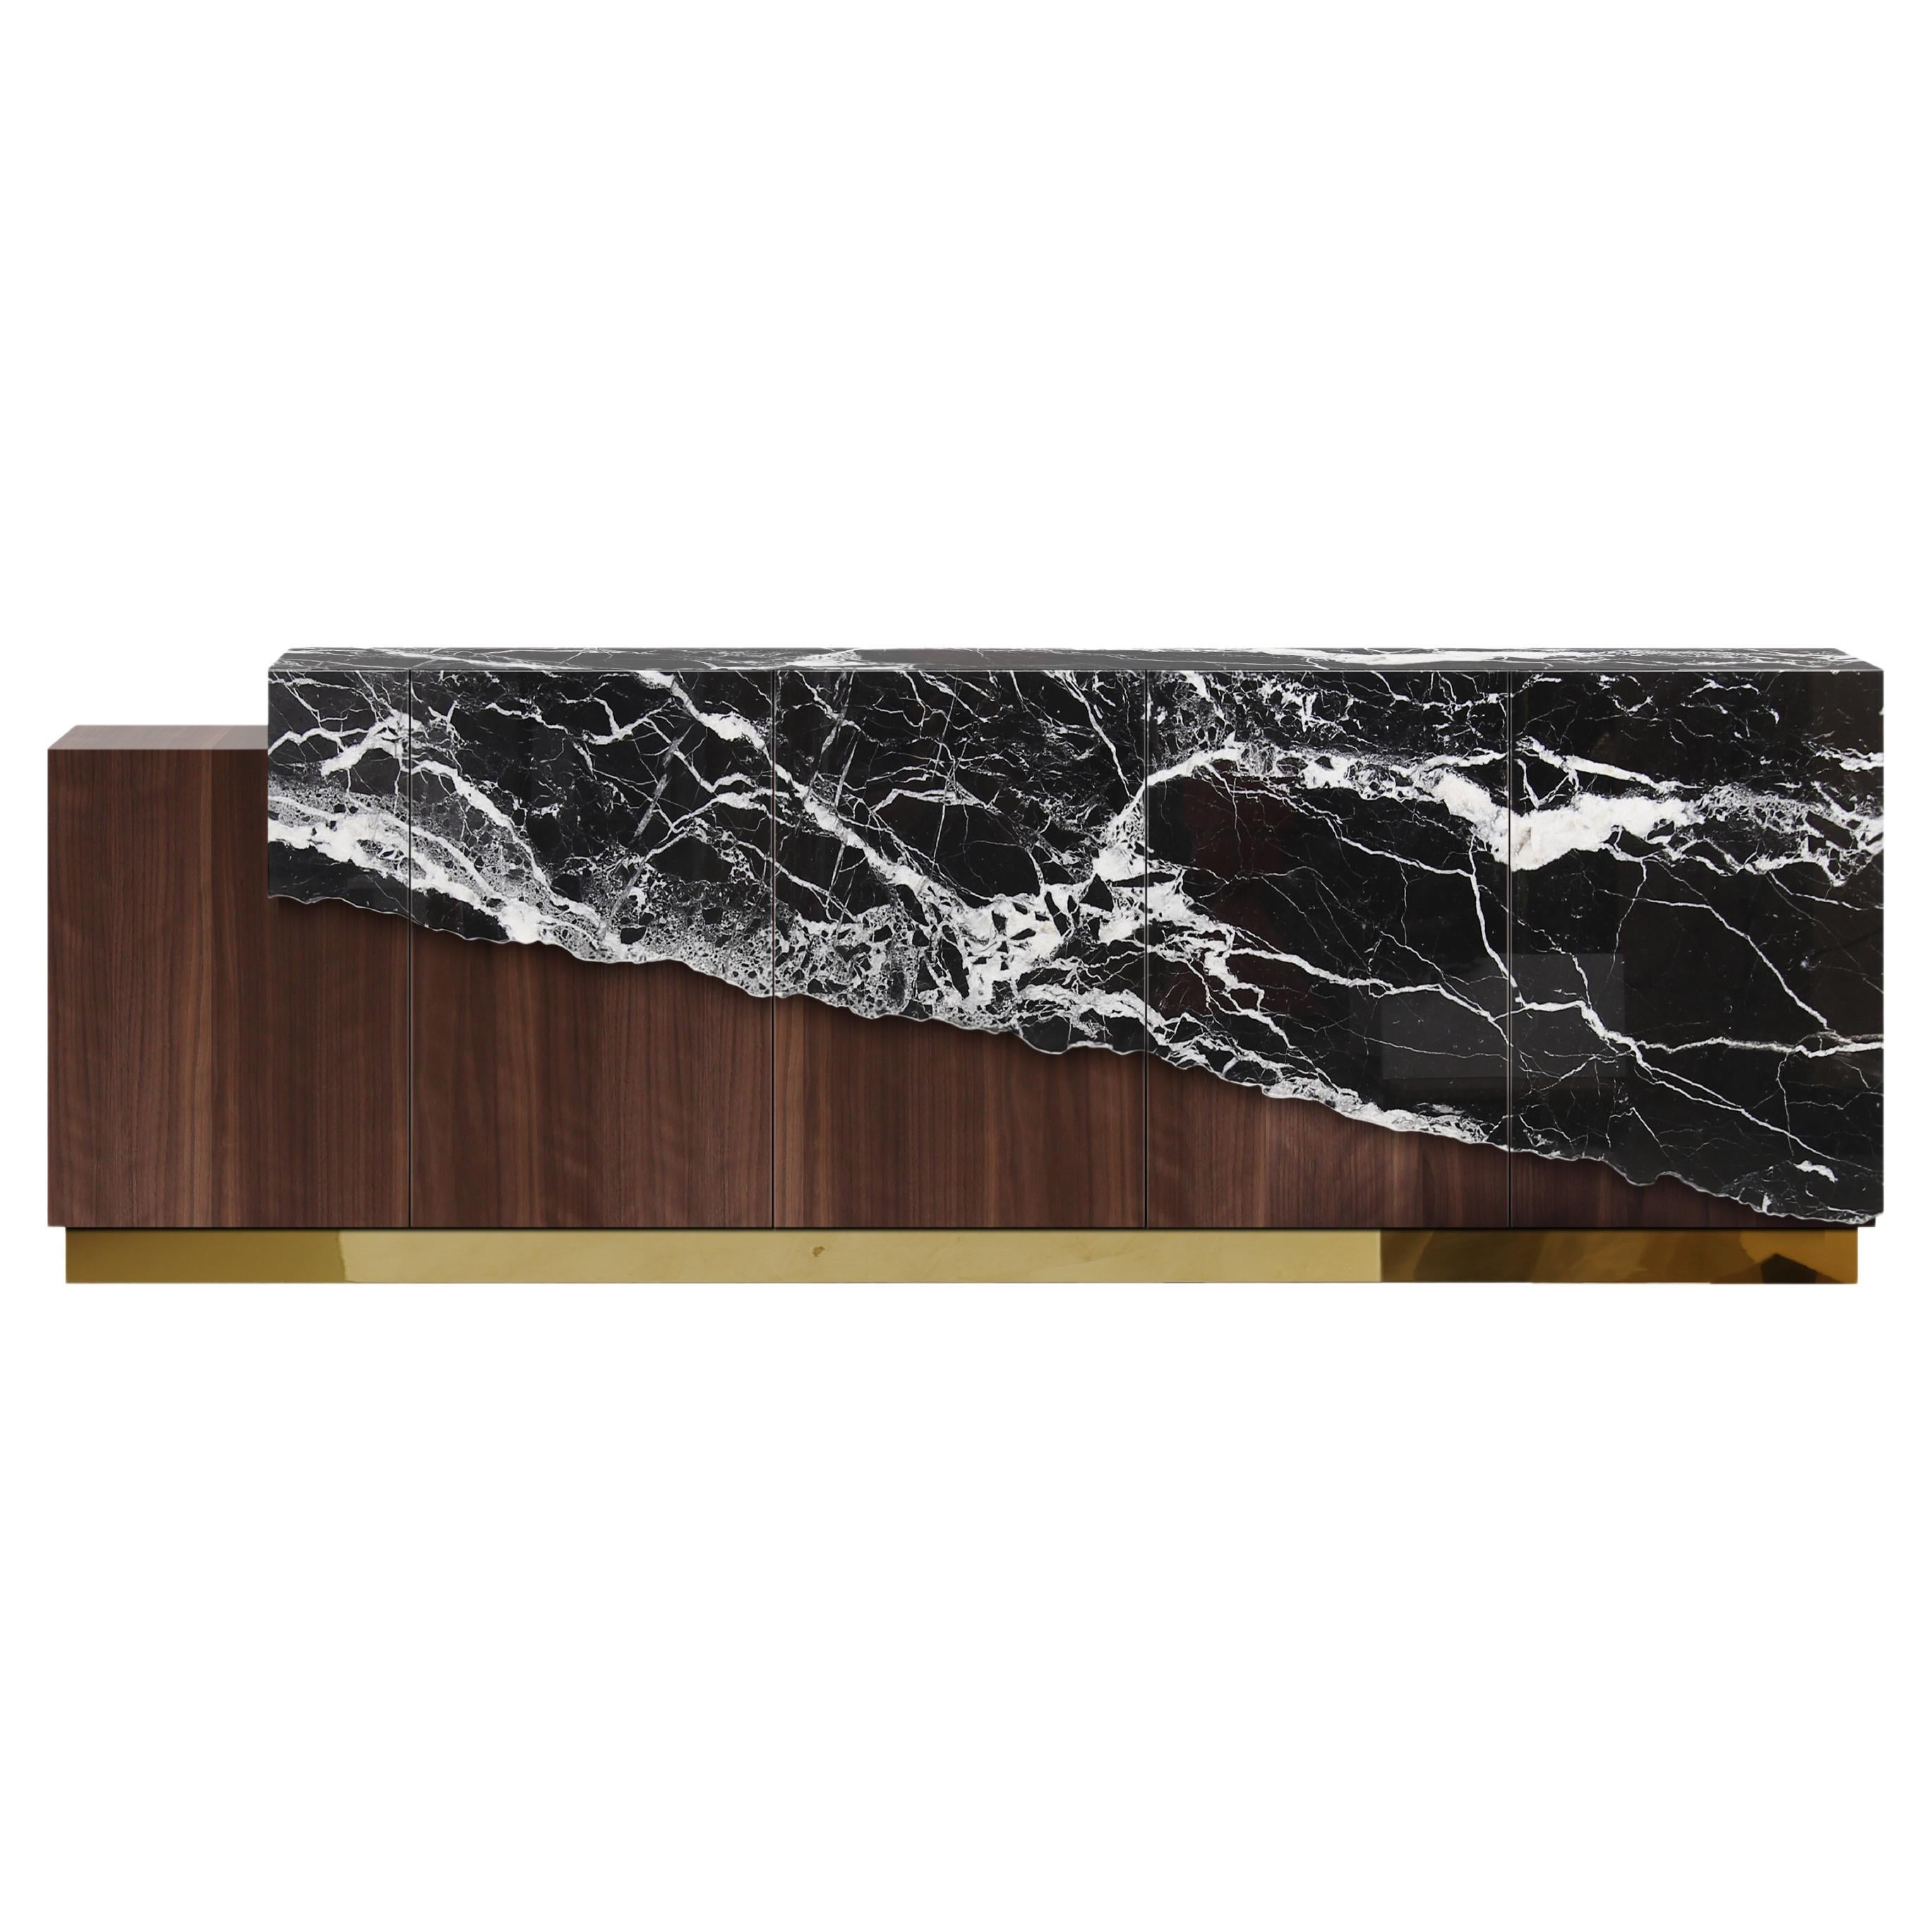 Contemporary Argentina Sideboard or Credenza in Marble, Walnut and Brass